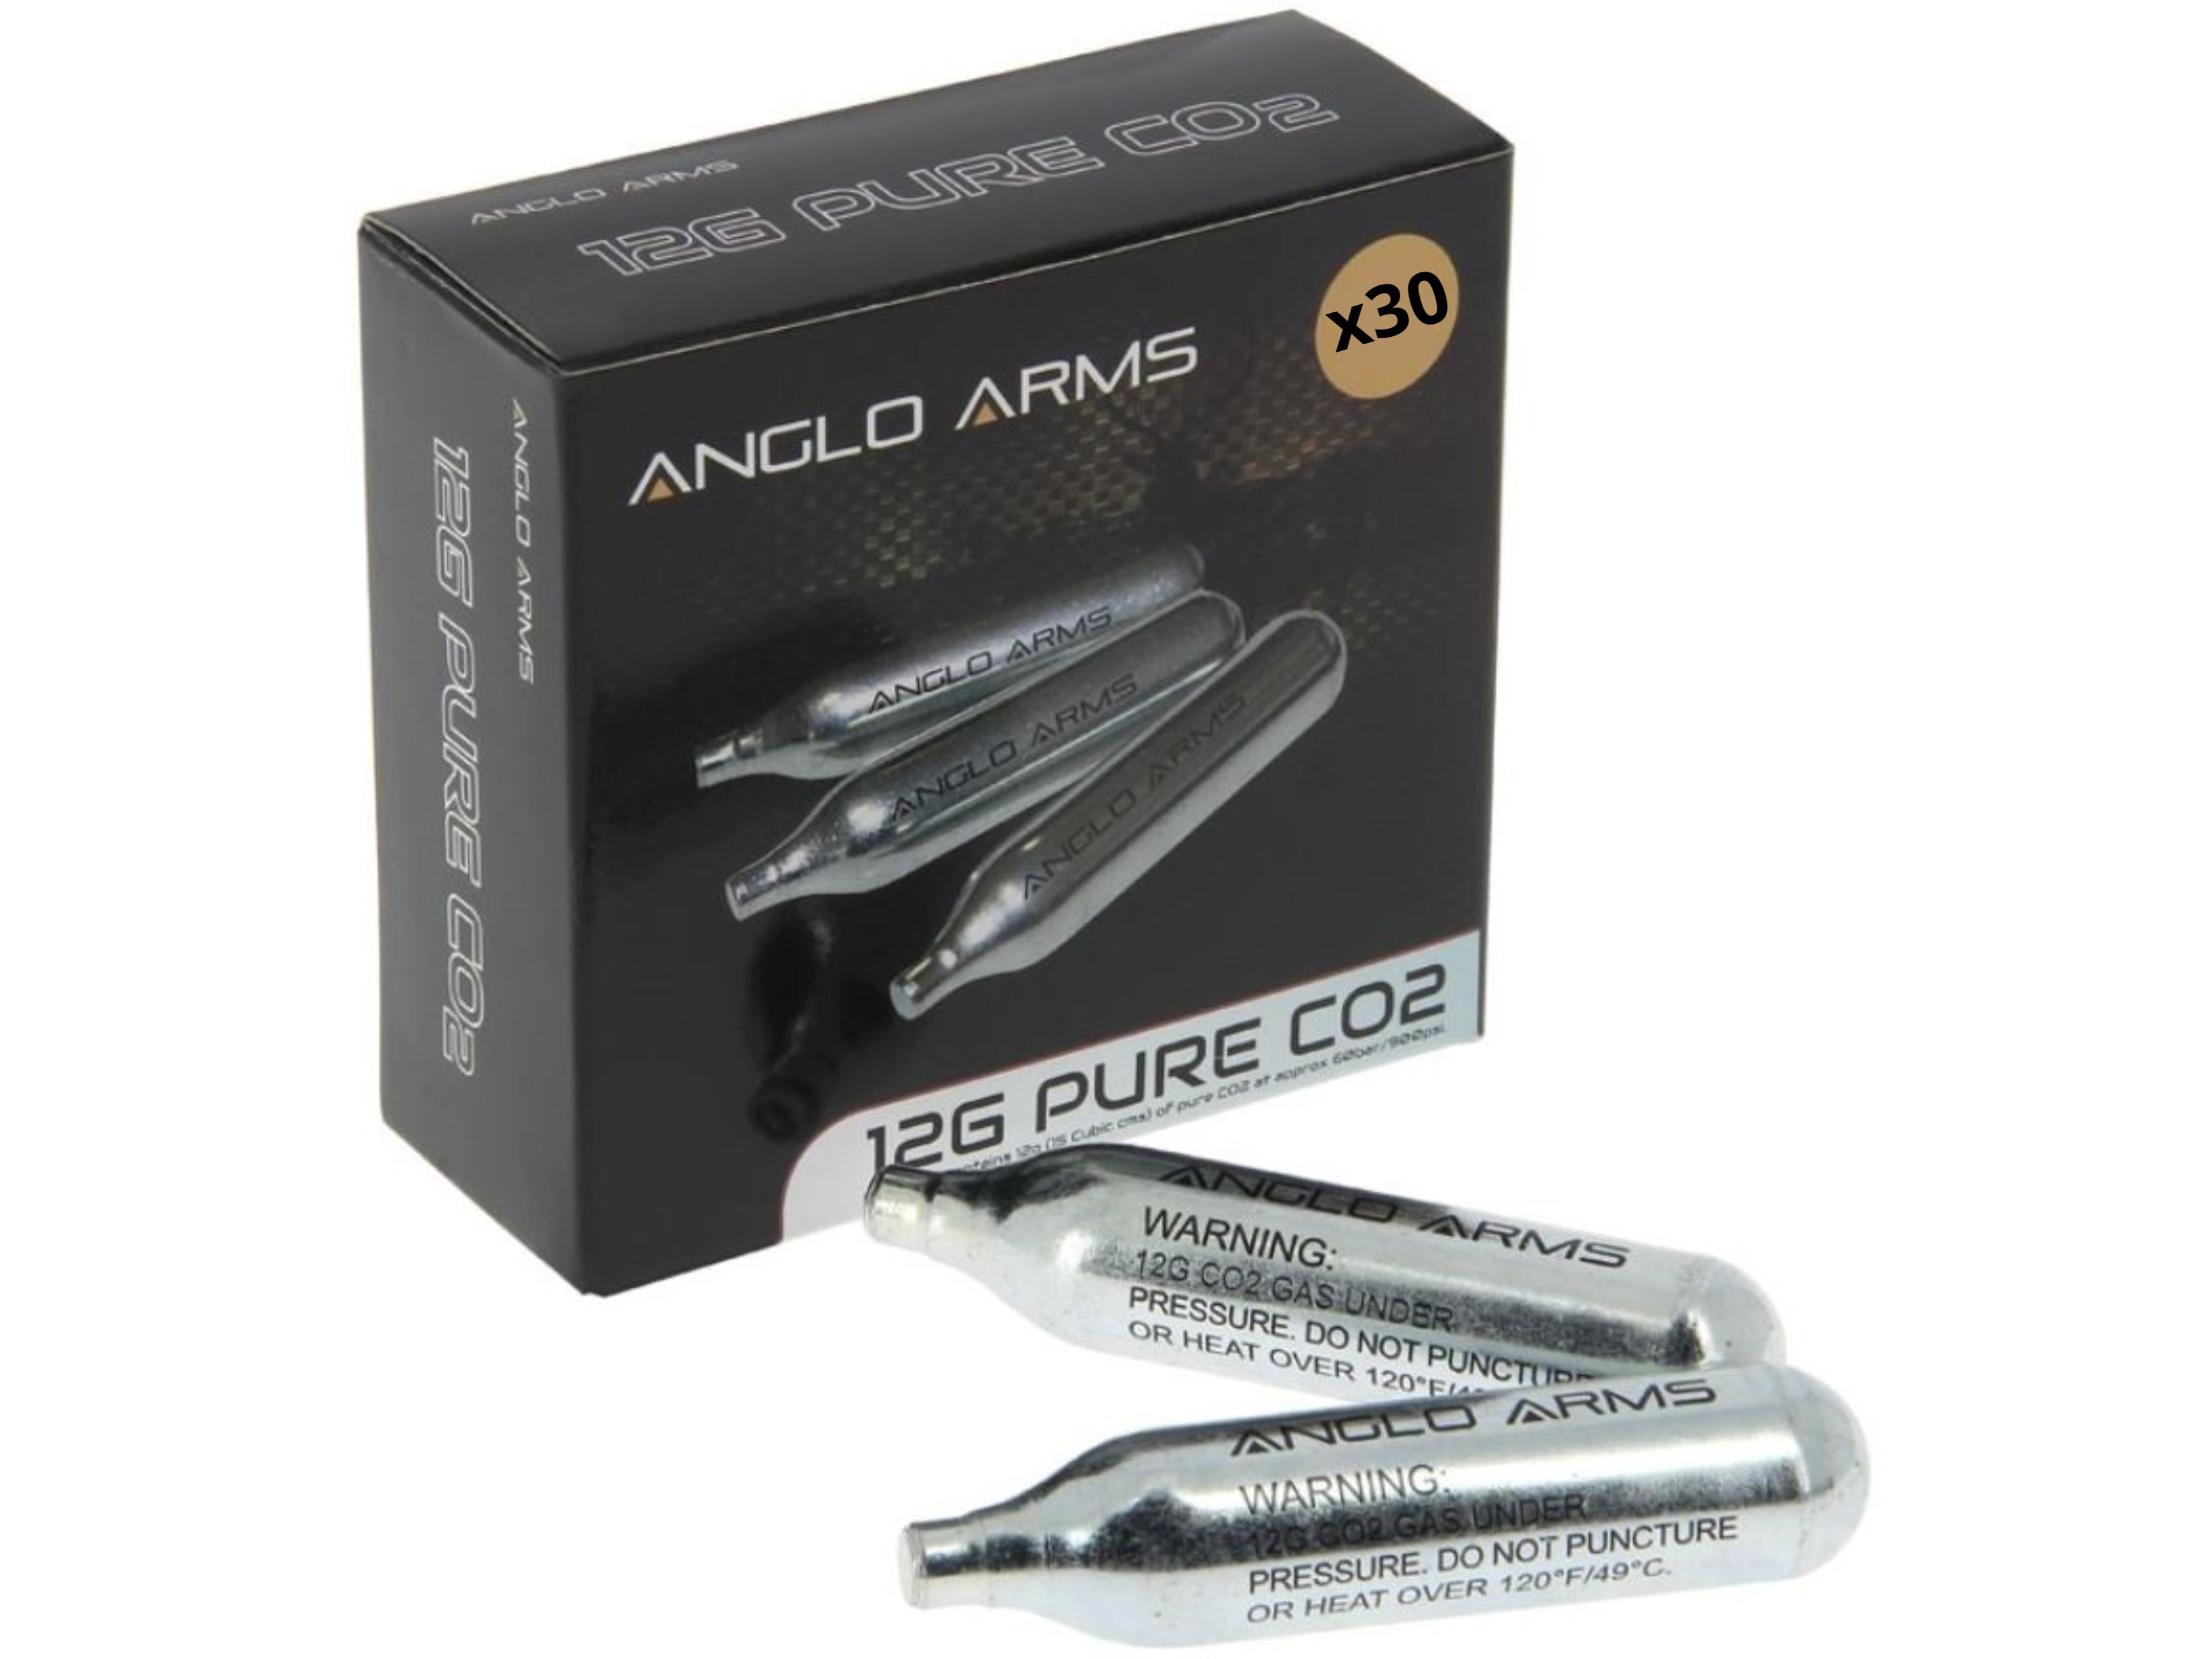 ANGLO ARMS 30 X ANGLO ARMS 12G GRAM CO2 CAPSULE CARTRIDGE SET